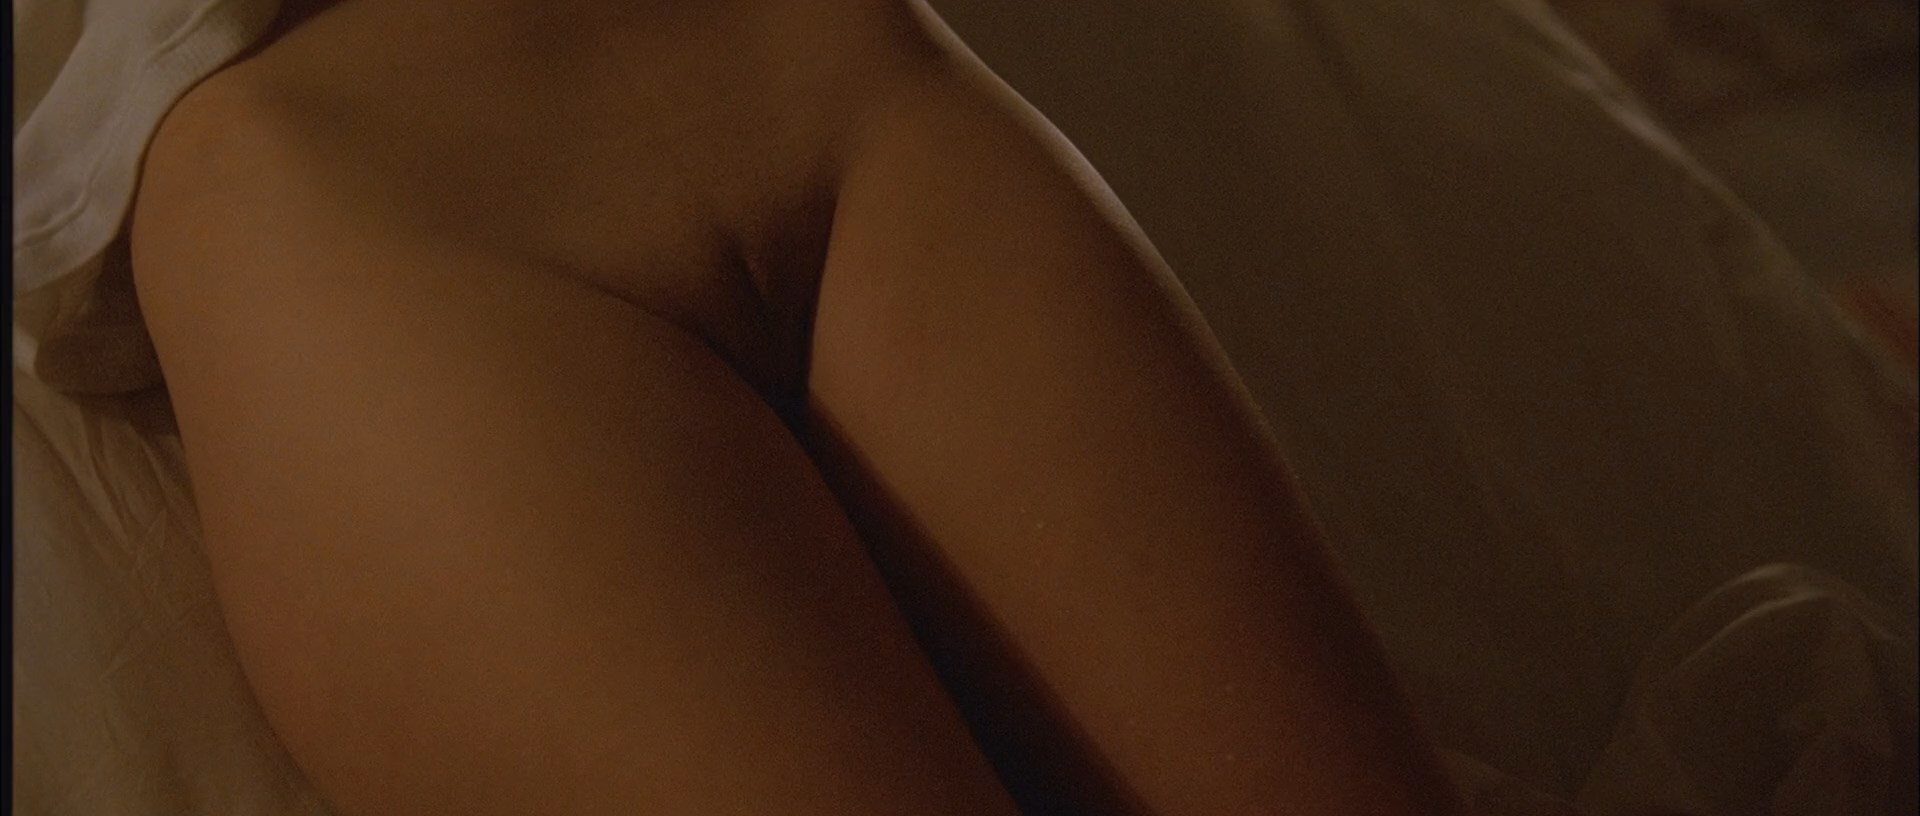 Samantha Morton shows her pussy when she is laying on the bed.